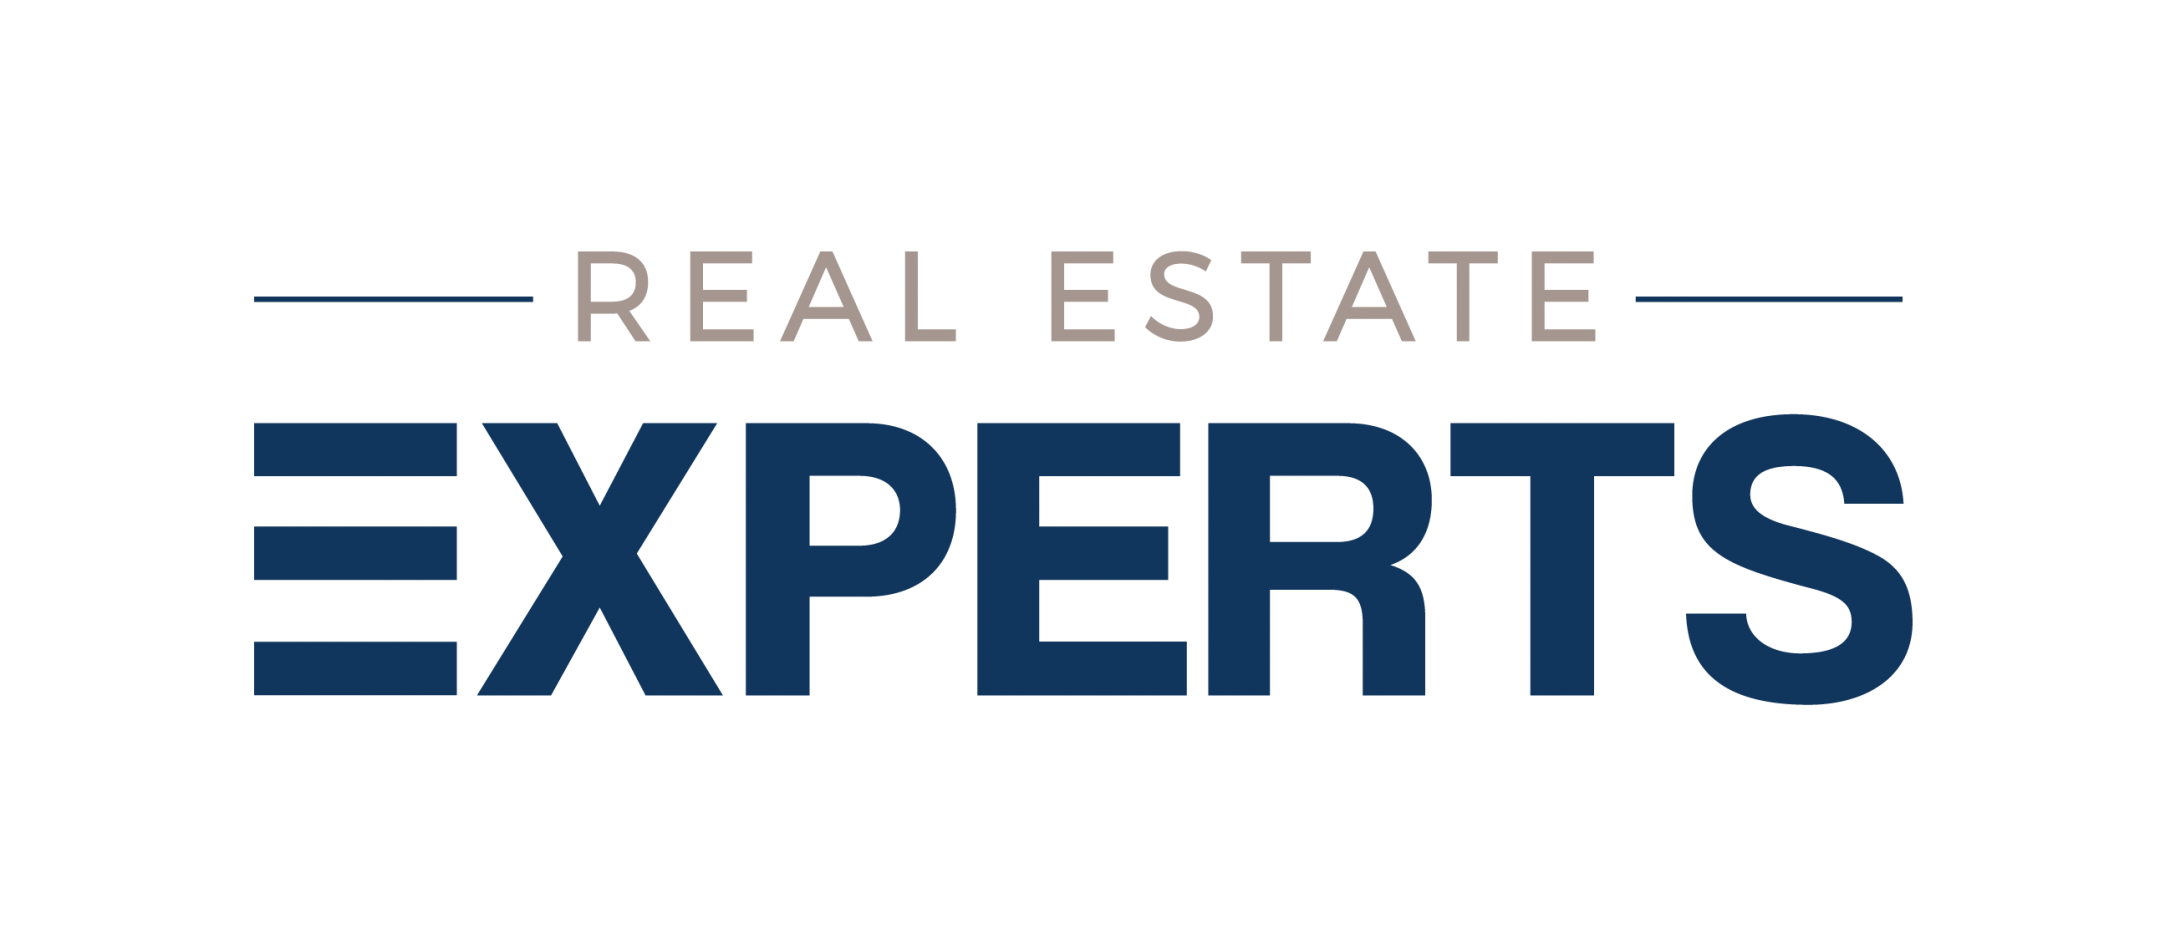 Real Estate Experts